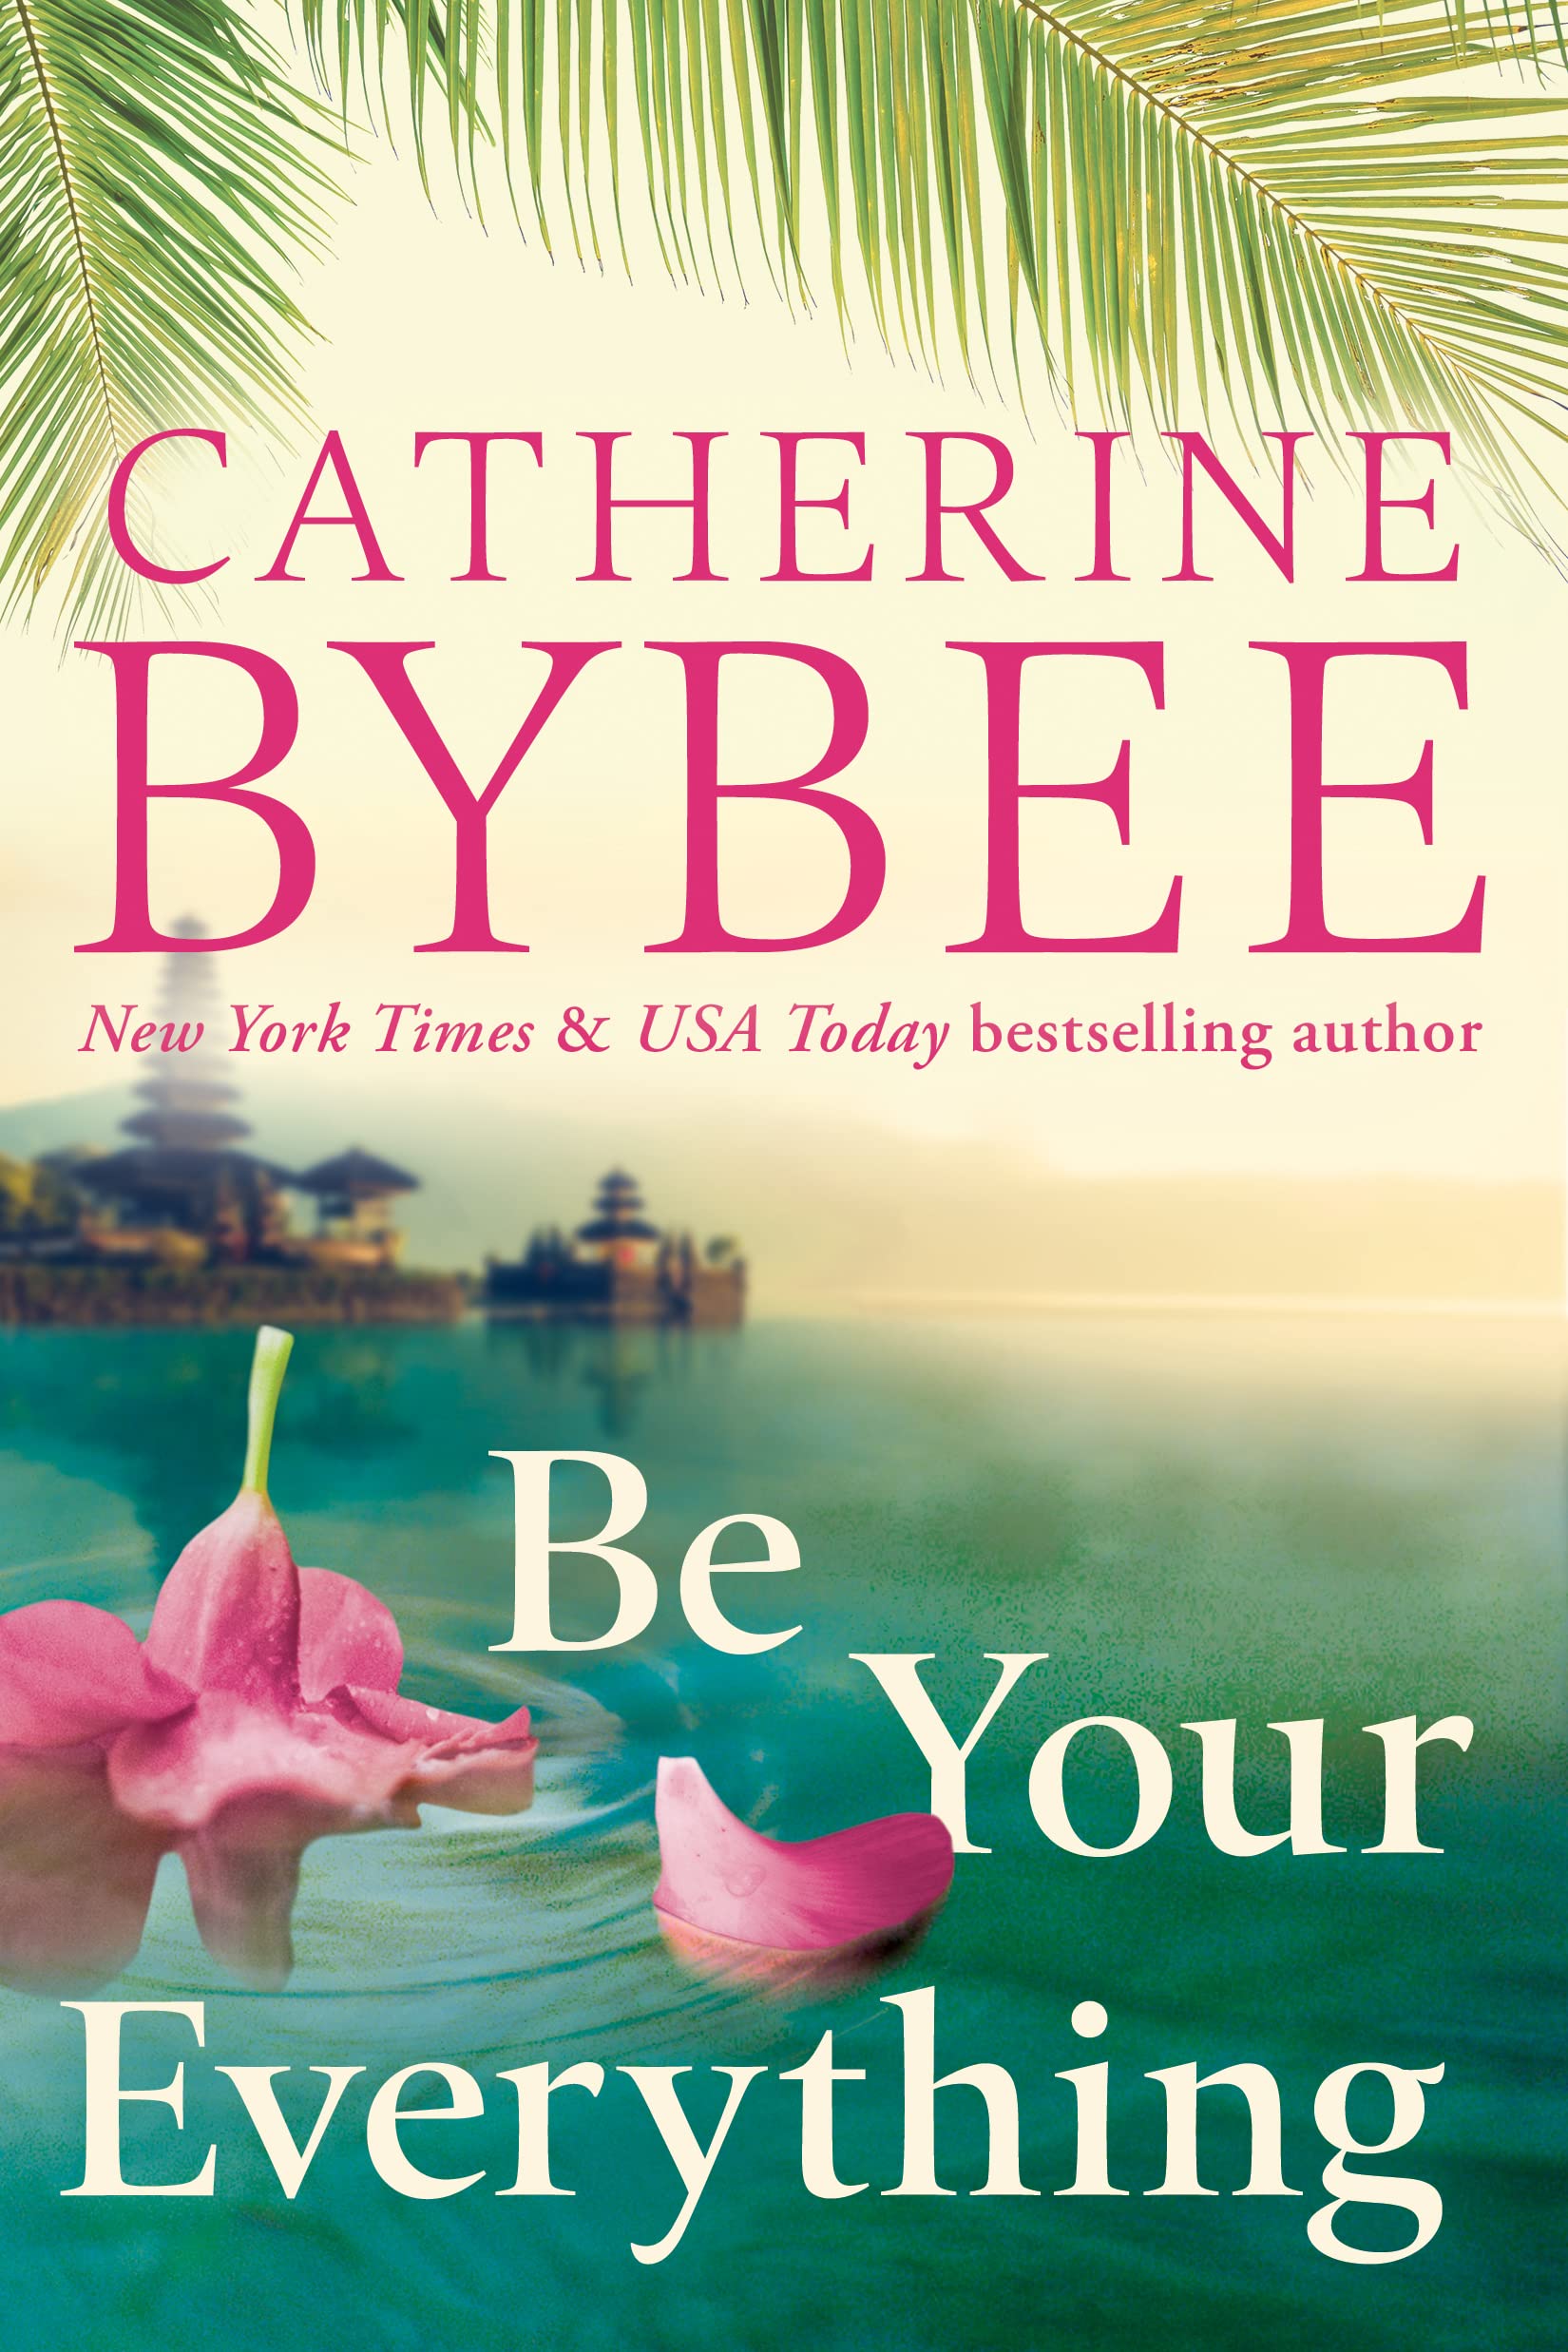 Be Your Everything by Catherine Bybee